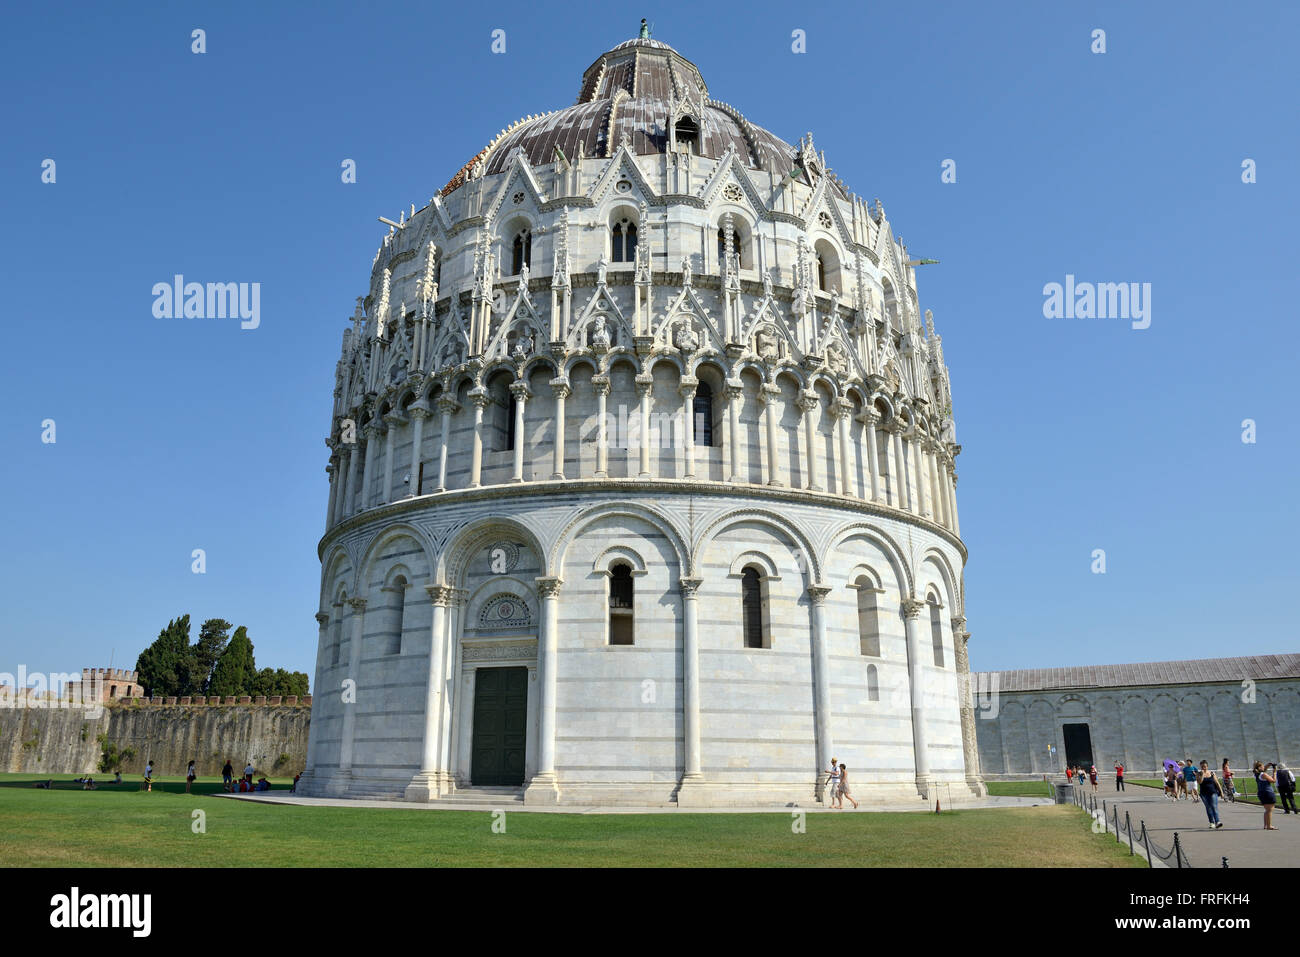 Baptistry of St. John, Piazza del Duomo, Cathedral Square, Campo dei Miracoli, Square of Miracles, UNESCO World Heritage Site, Pisa, Toscana Stock Photo